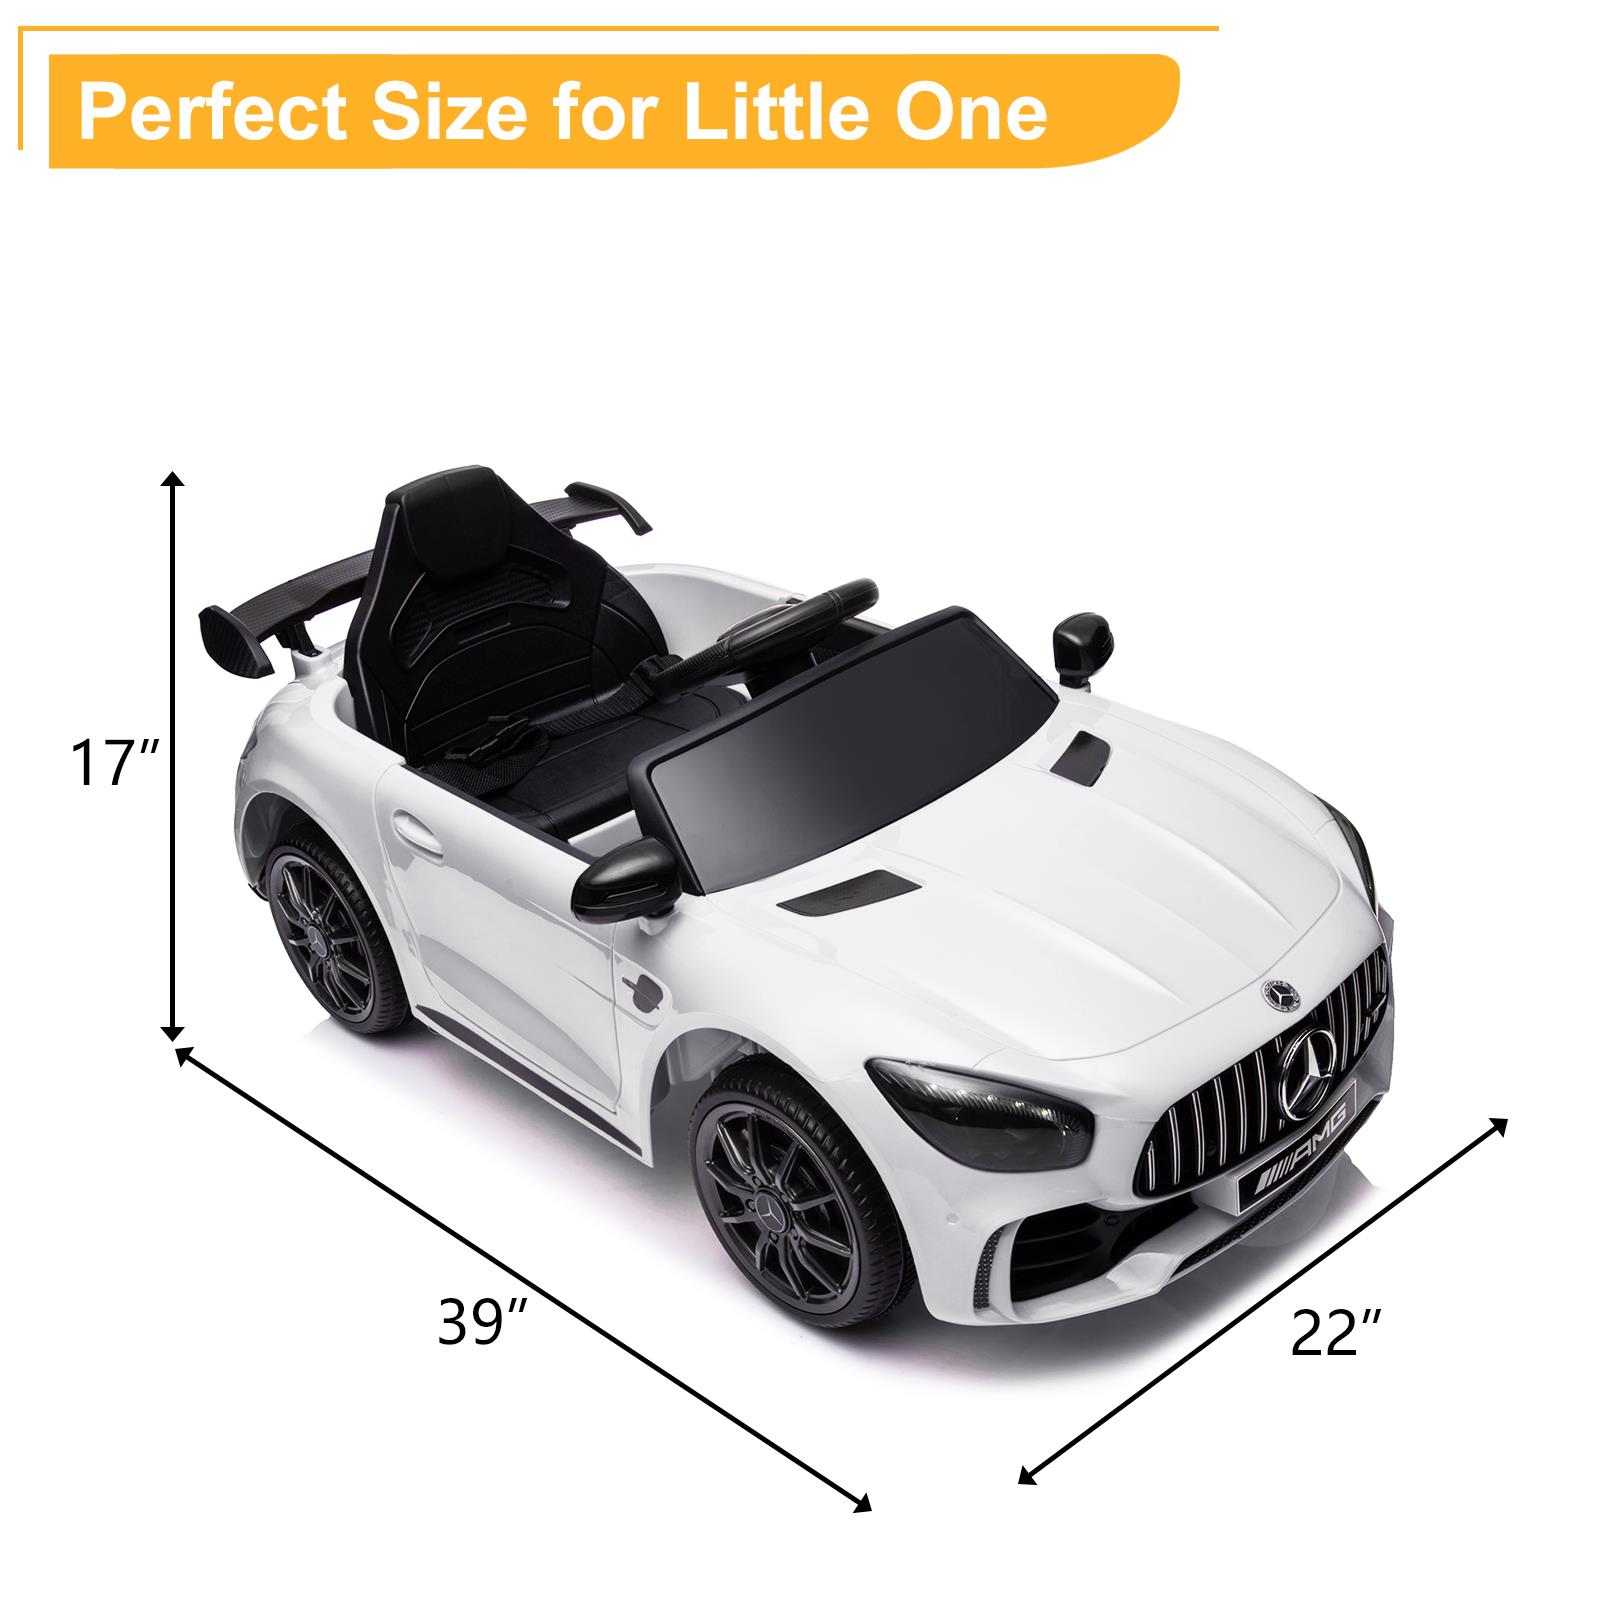 UBesGoo 12V Licensed Mercedes-Benz Electric Ride on Car Toy for Toddler Kid w/ Remote Control, LED Lights, White - image 3 of 9